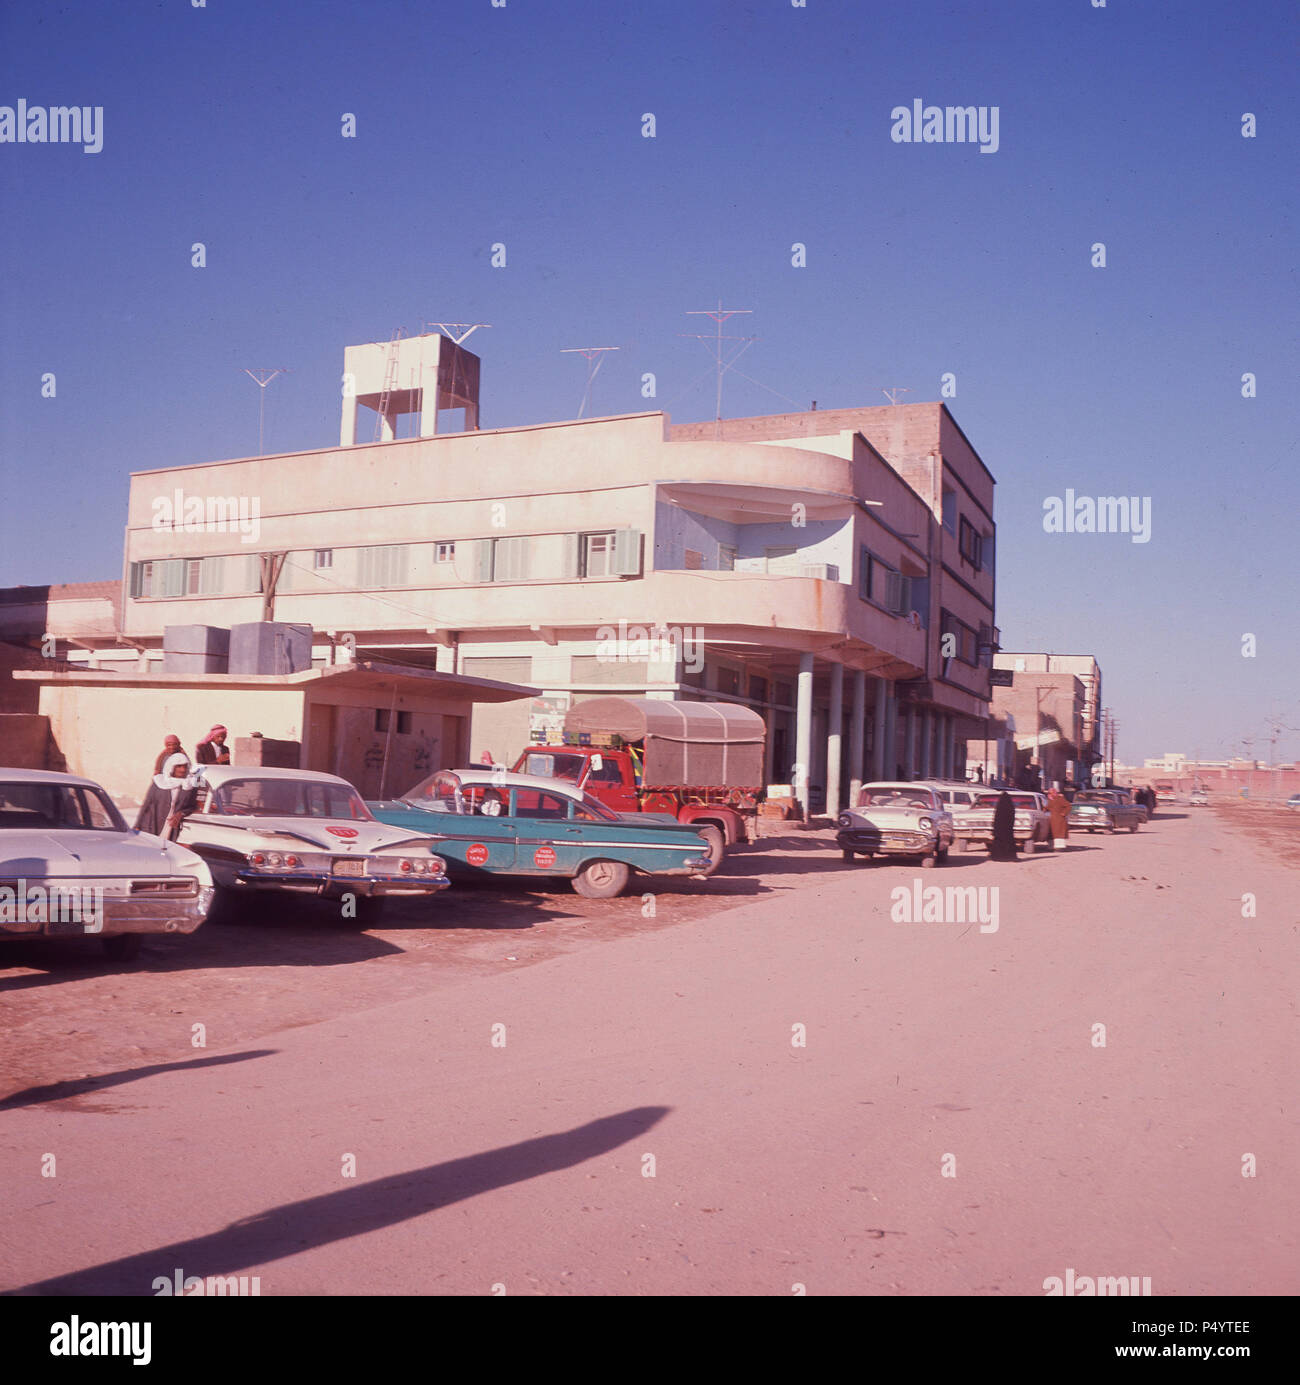 Mid-1960s, historical, Saudi Arabia, American cars parked outside a building at Al-Kharj, known as the Al Kharj oasis, because of the deepwater wells located there. It subsquently grew to become the agriculture production centre of Saudi Arabia after the first experimental farm was established there in 1938. in the 1950s and 60s, the Arabian-American Oil Co, (ARAMCO) had responsibility for the Al Kharj farms which produced food for King Abdul and the Saudi Royal household.and the area became to look 'a little like west Texas'. Stock Photo